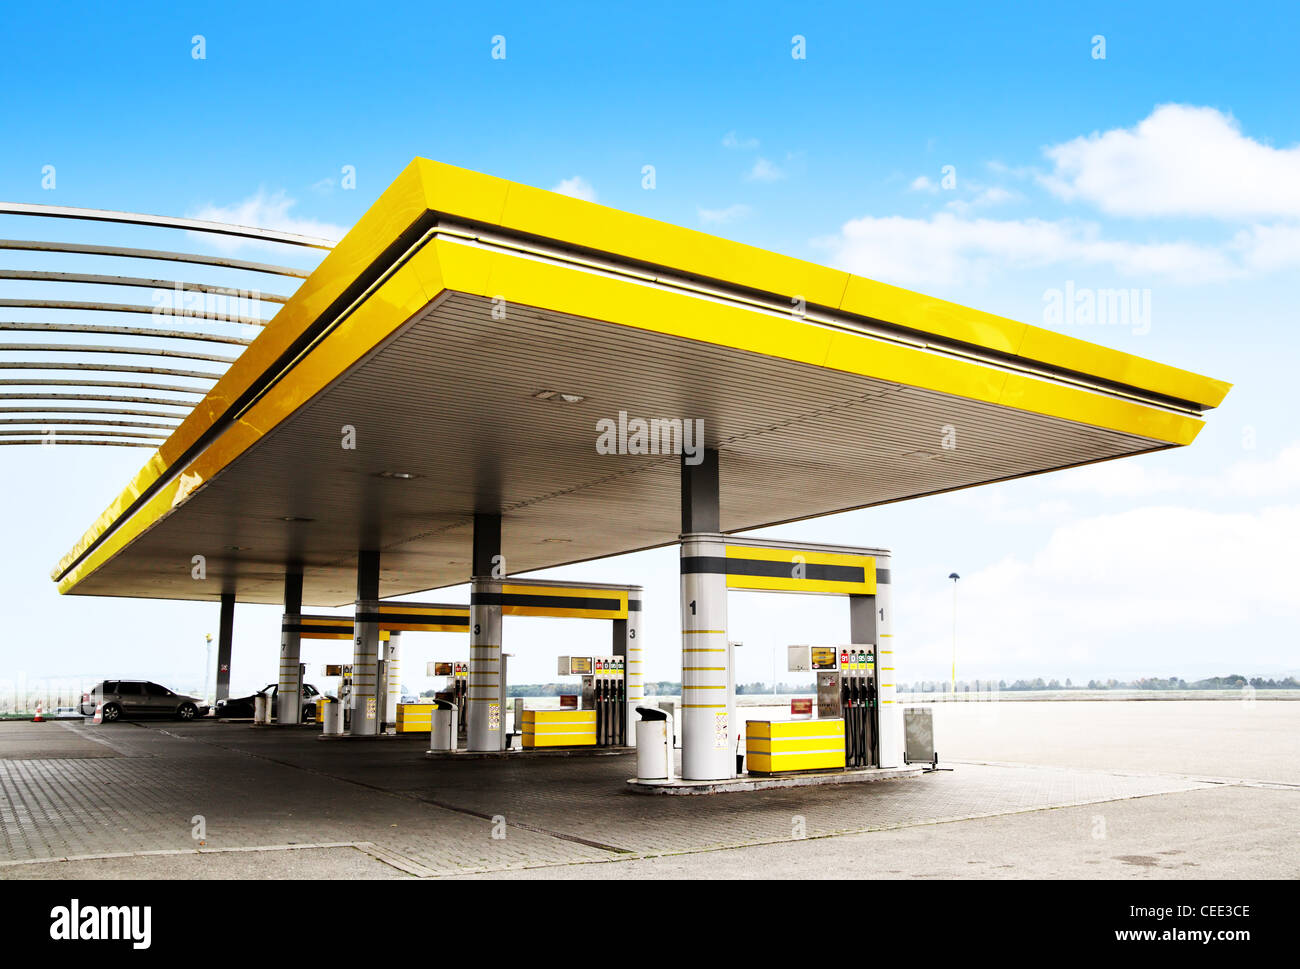 Gas refuel station with yellow roof close-up Stock Photo